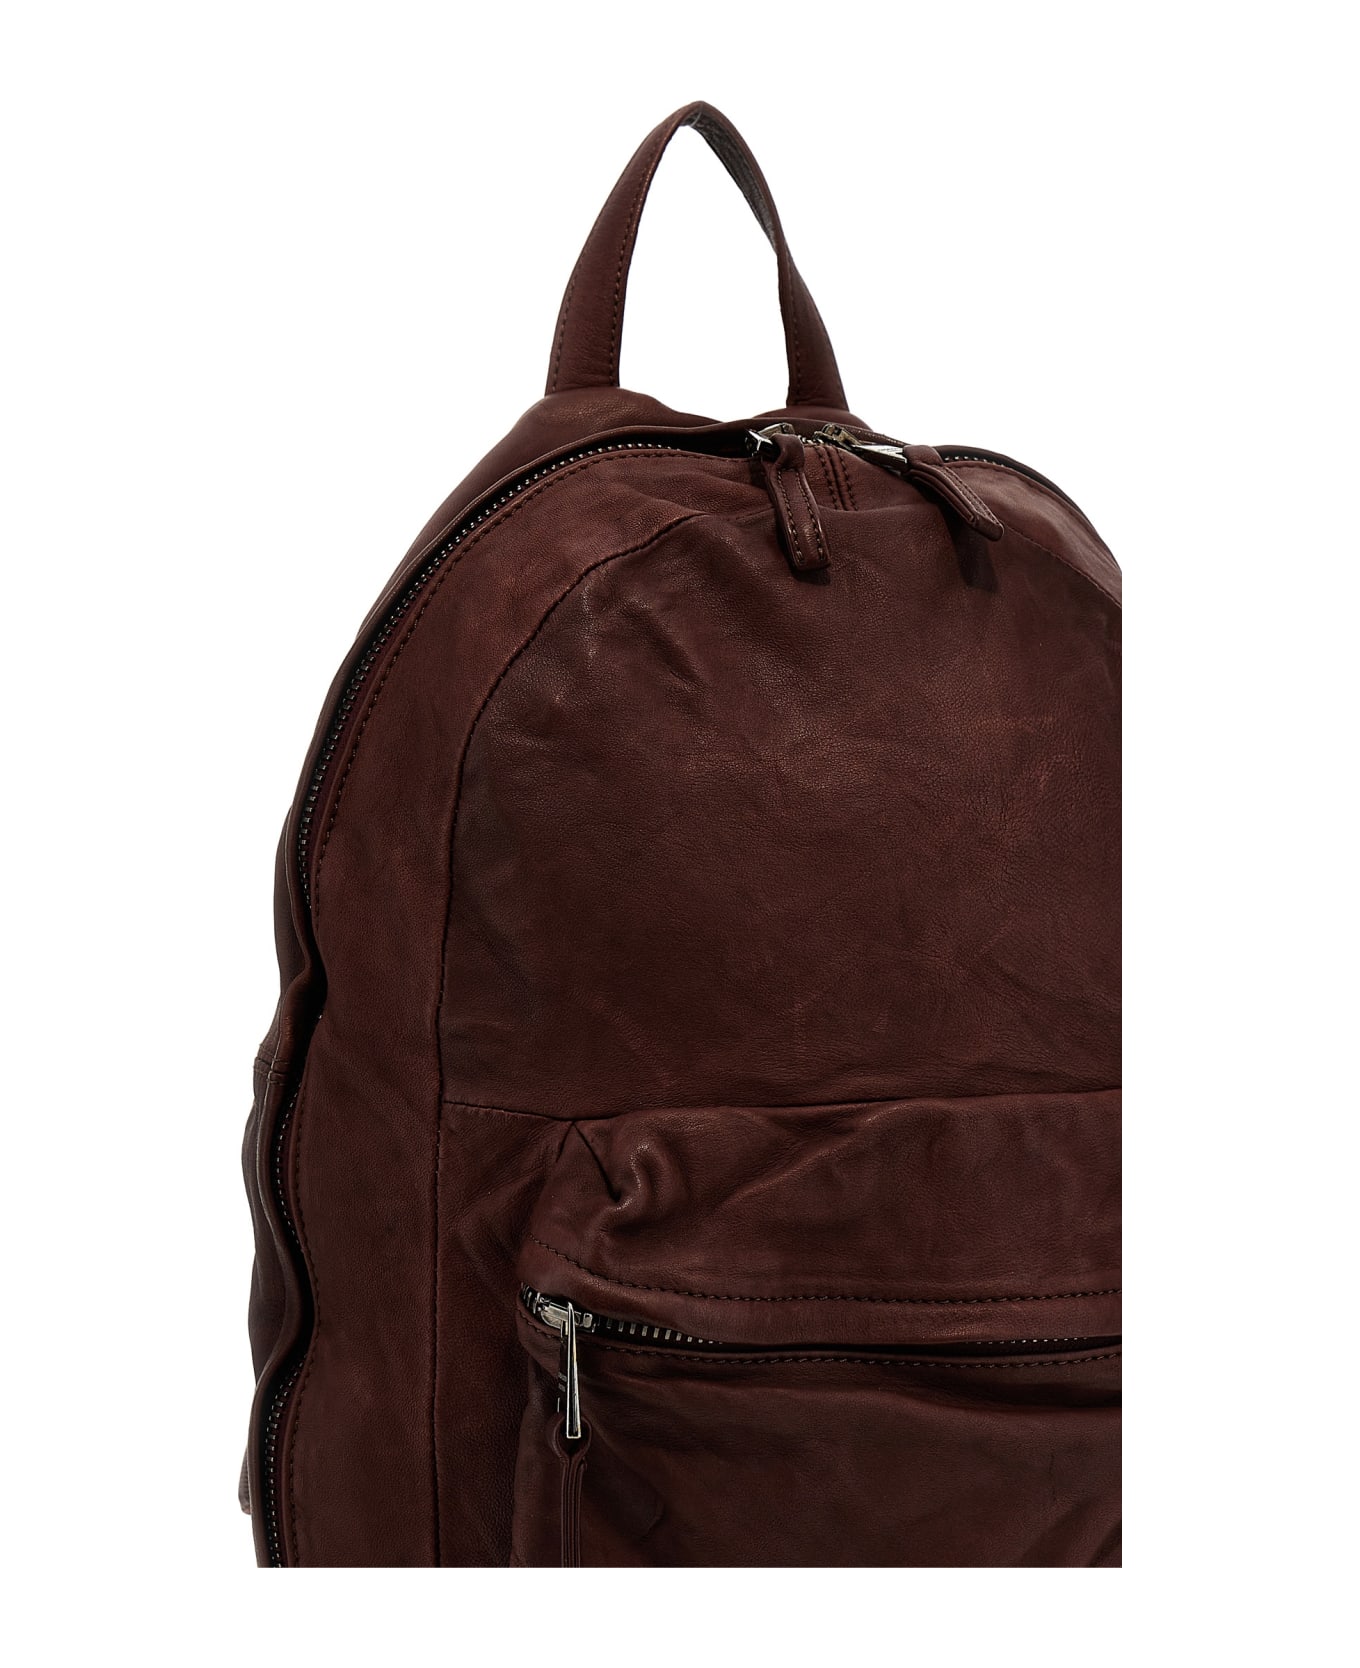 Giorgio Brato Leather Backpack - Bordeaux バックパック